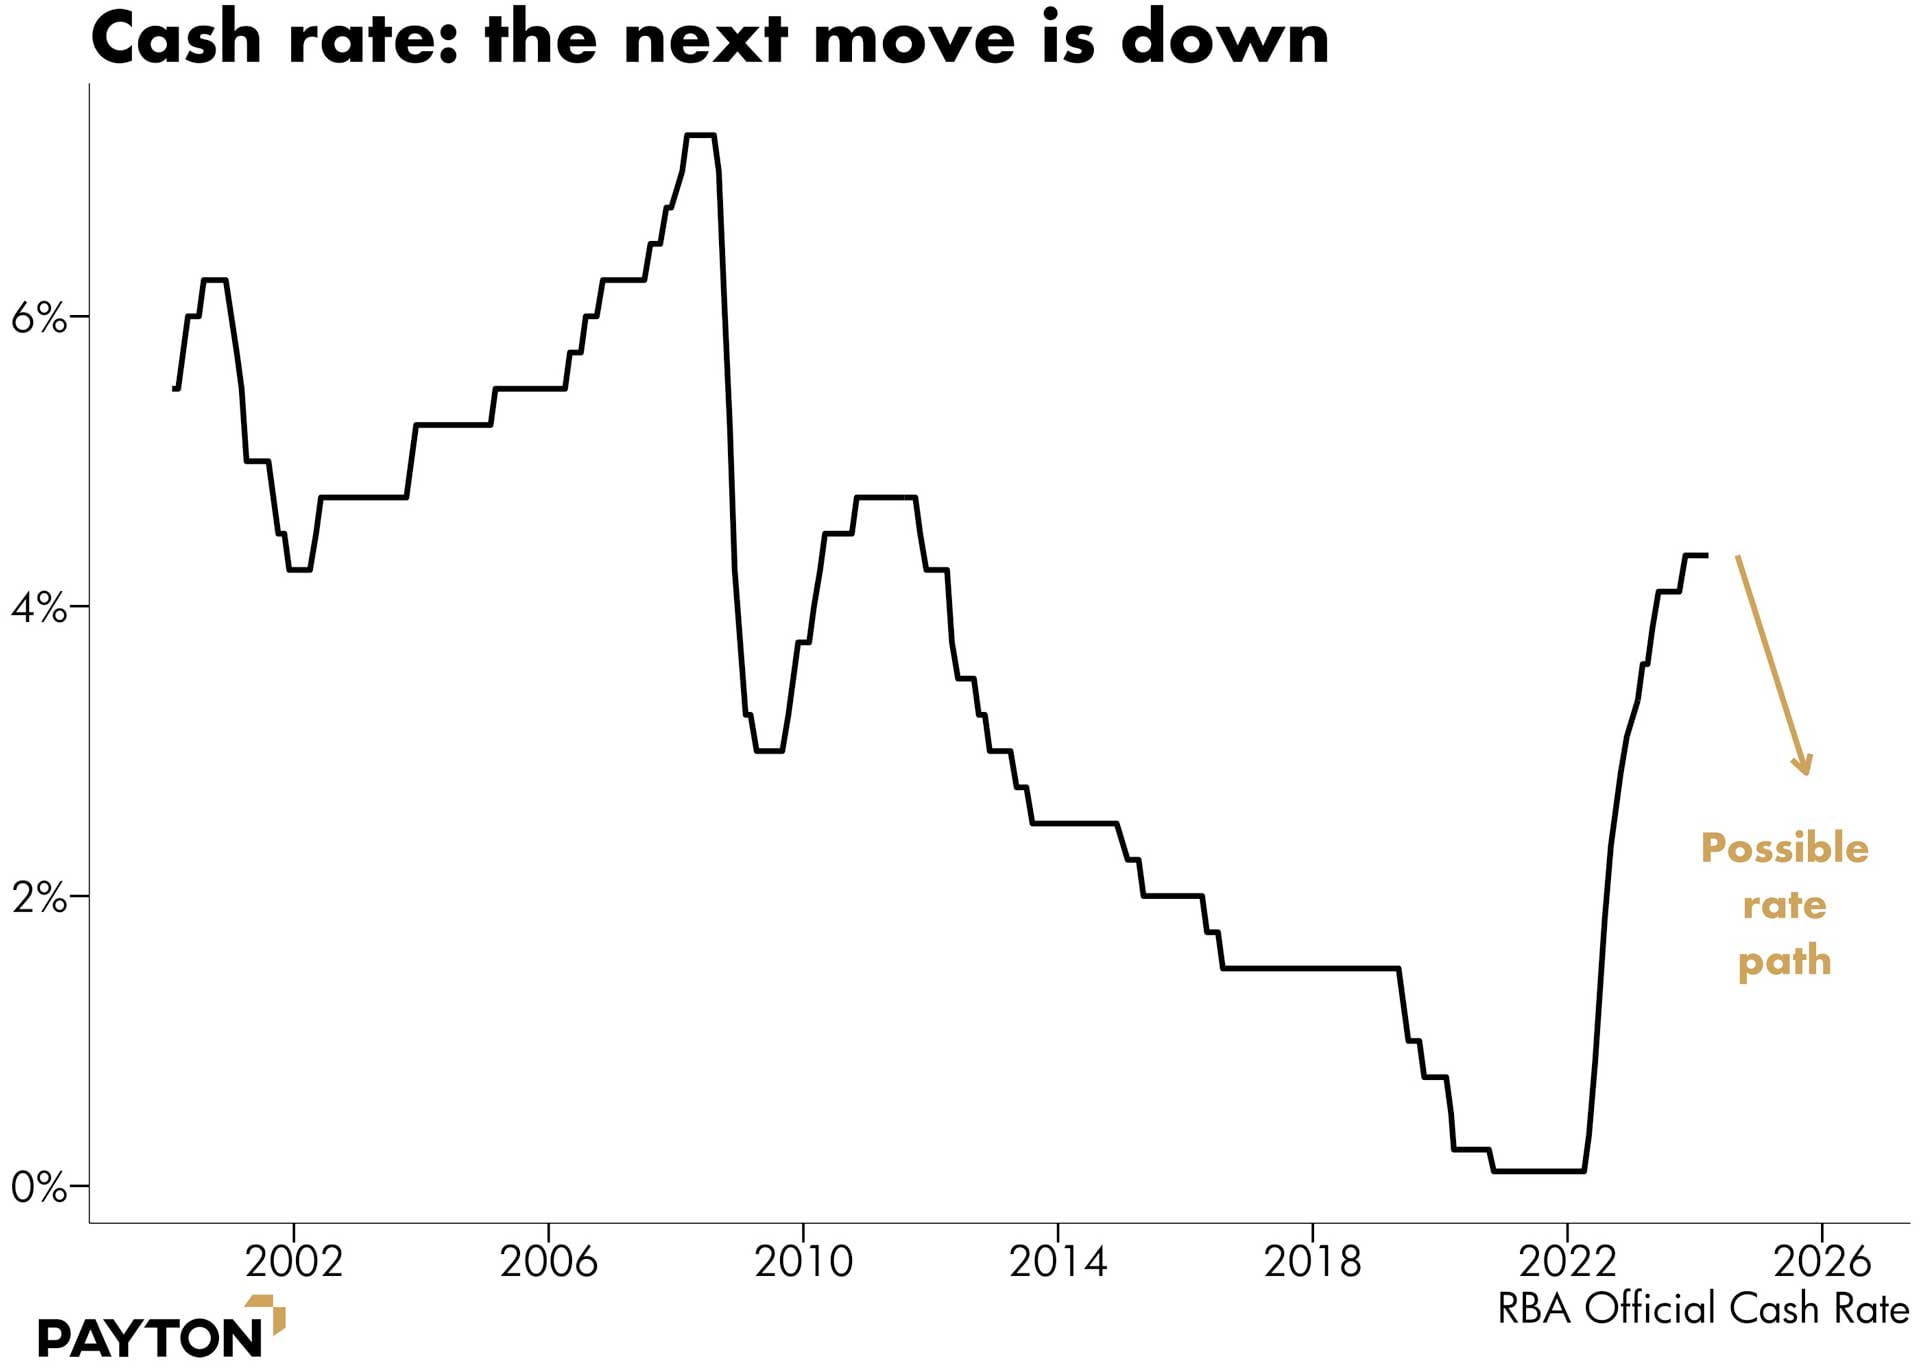 Cash rate -the next move is down